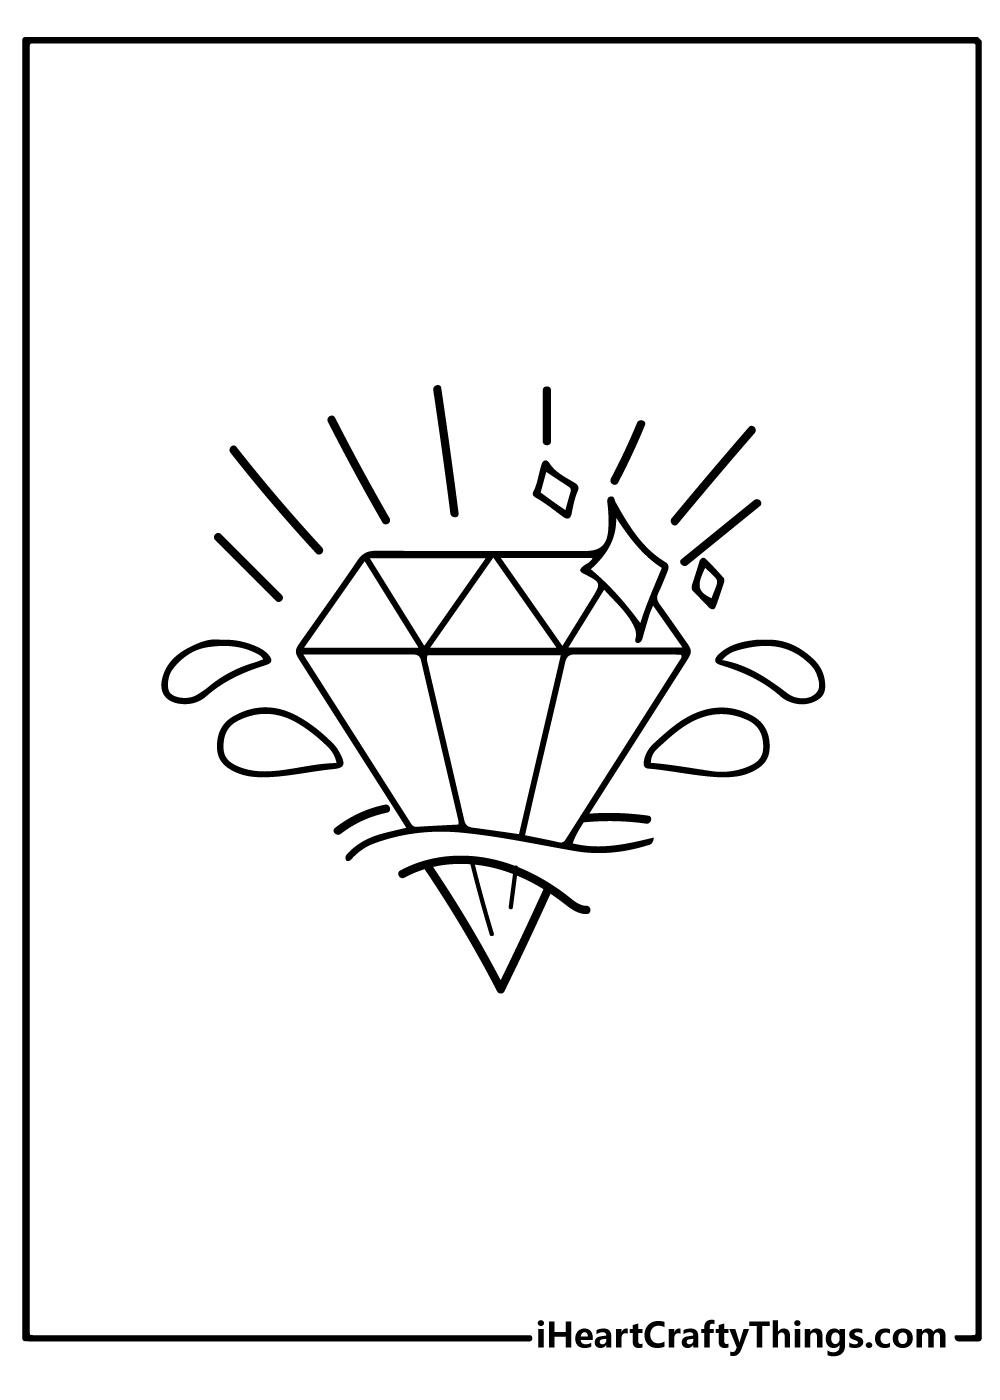 Tattoos coloring pages free printables